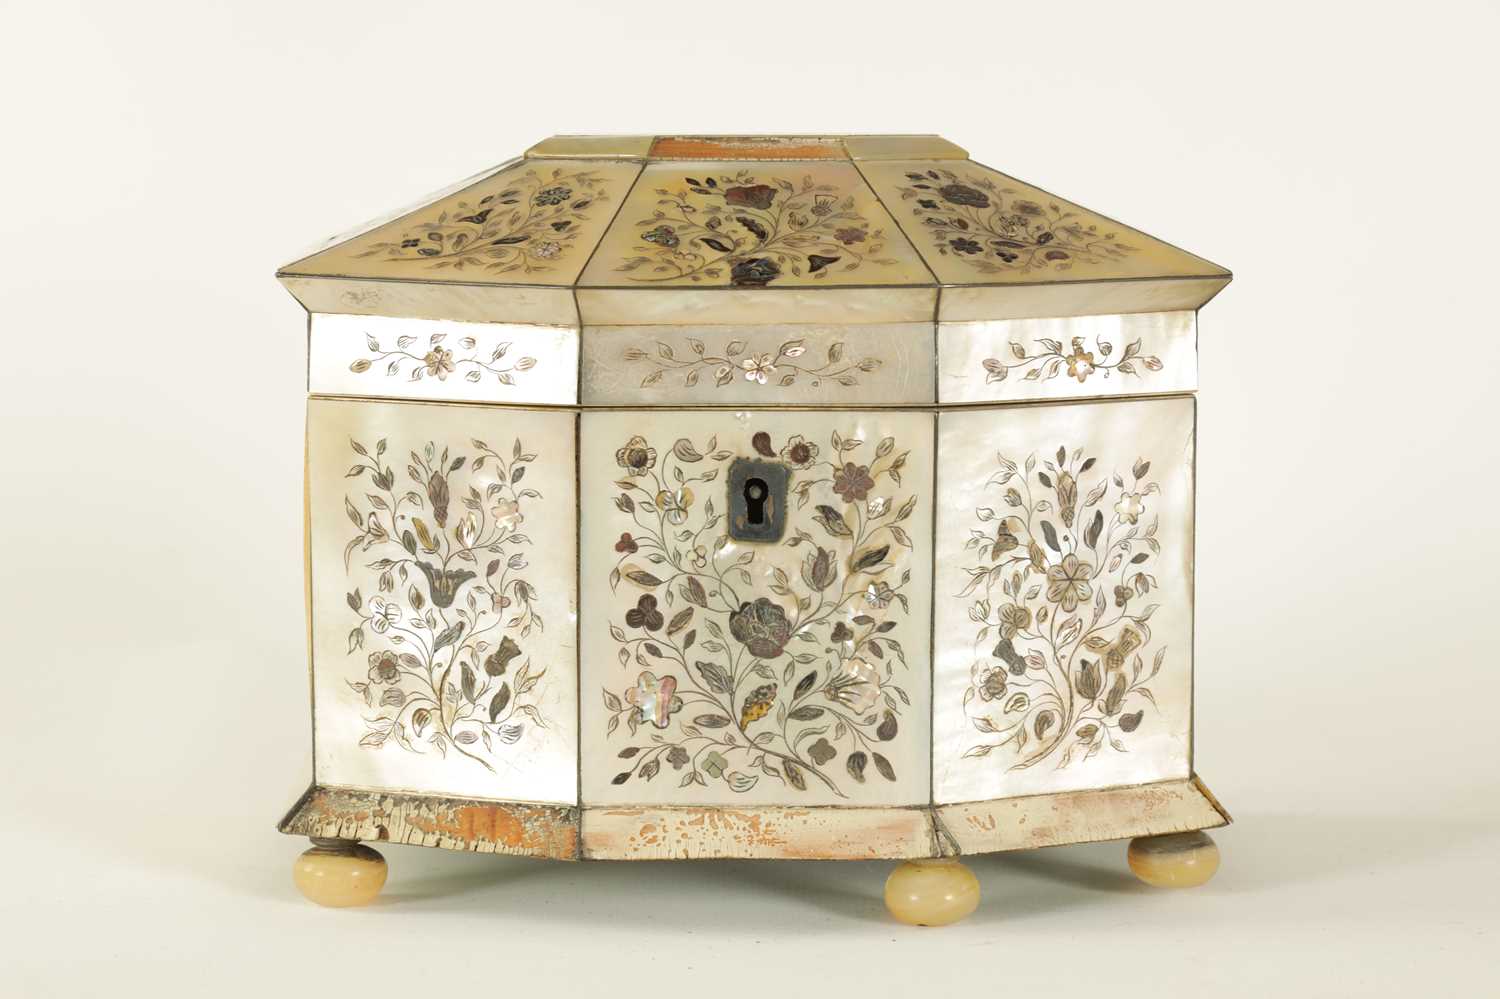 A 19TH CENTURY INLAID MOTHER OF PEARL TEA CADDY WITH CANTED ANGLED FRONT - Image 3 of 10